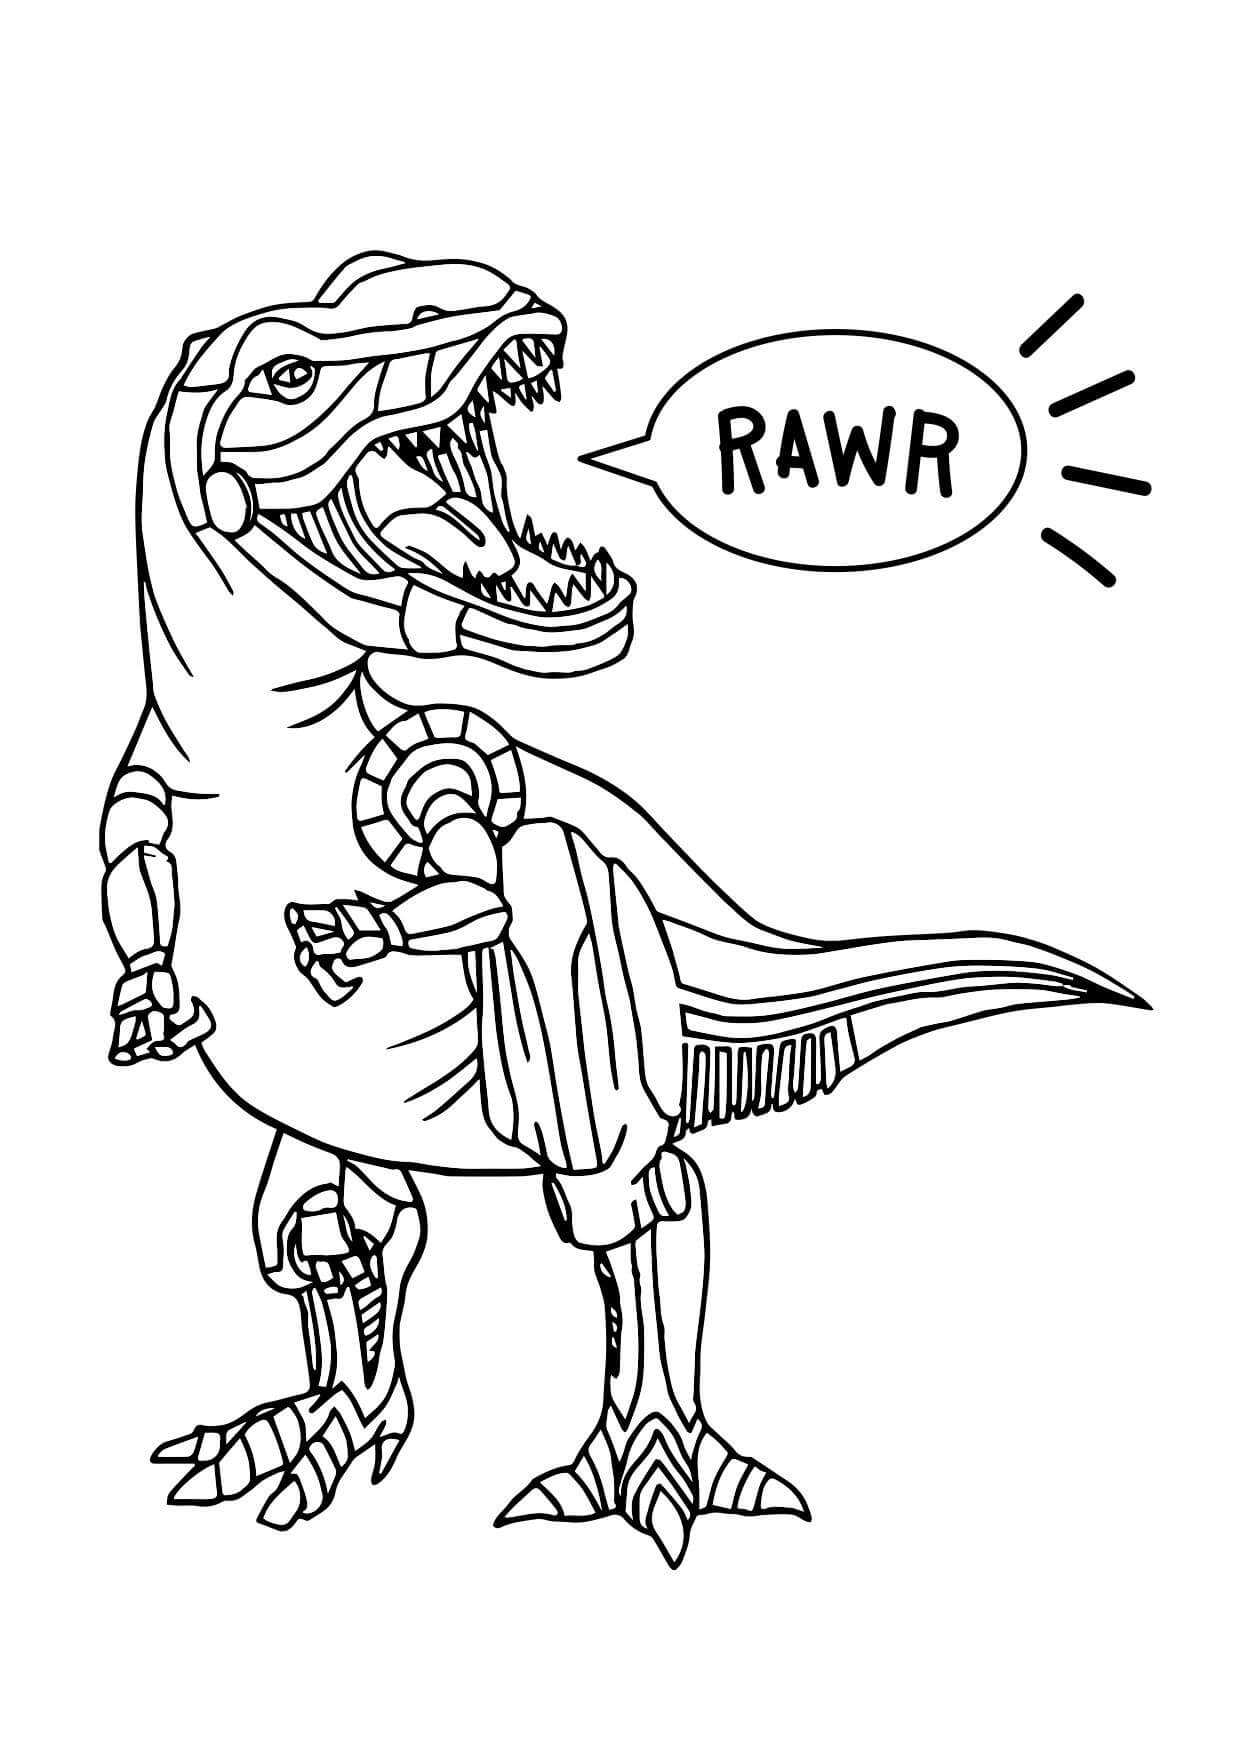 Dinosaure Rugissant coloring page